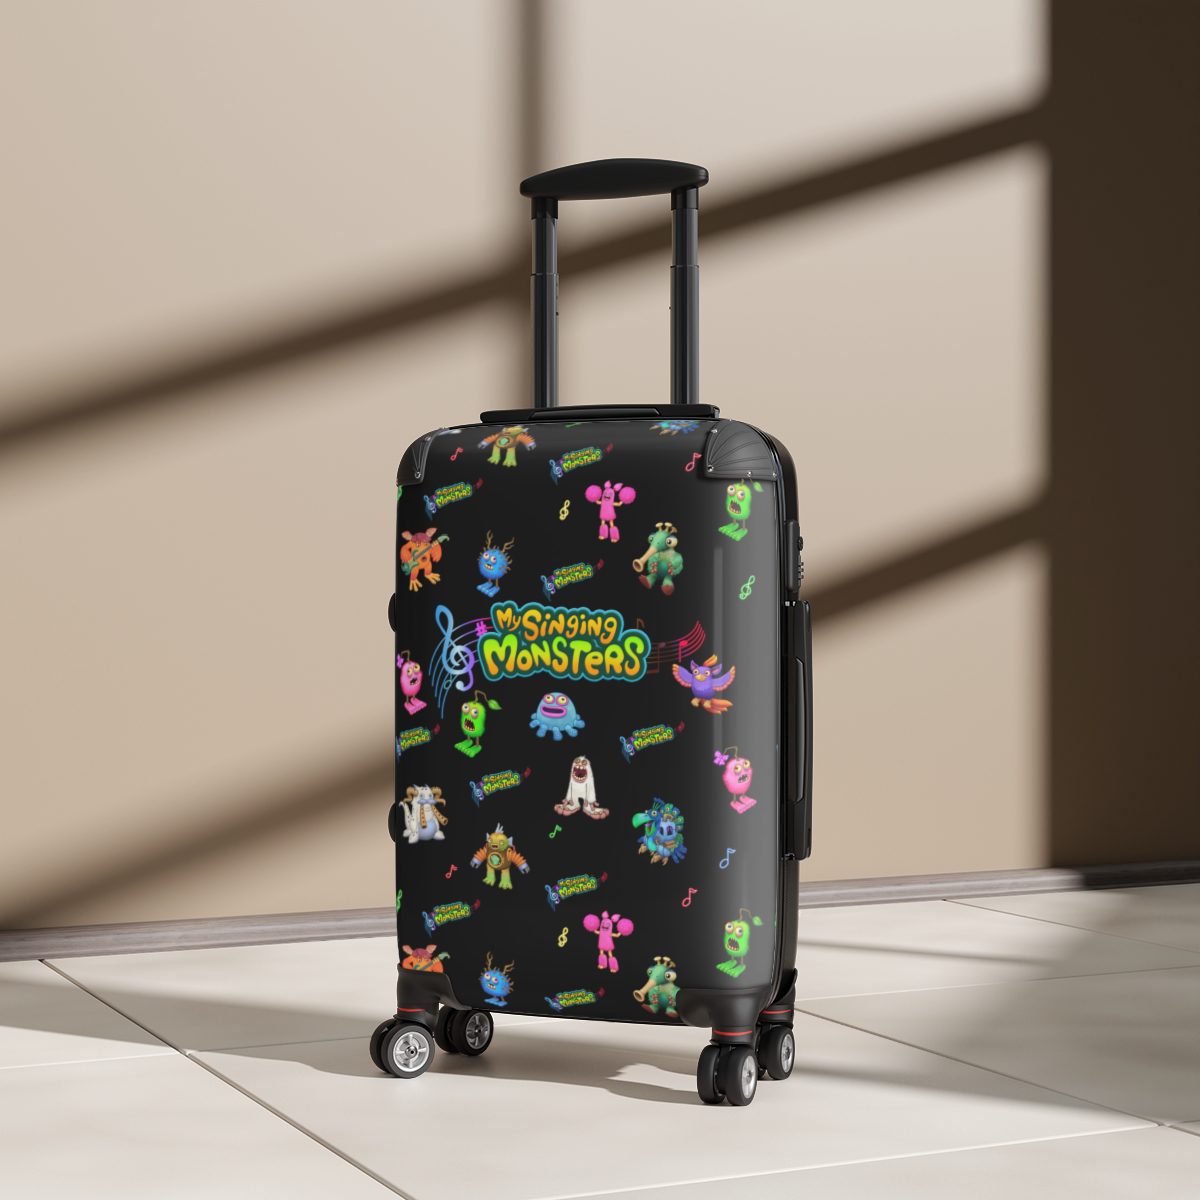 My Singing Monsters Black Suitcase Carry-On Suitcase Cool Kiddo 16